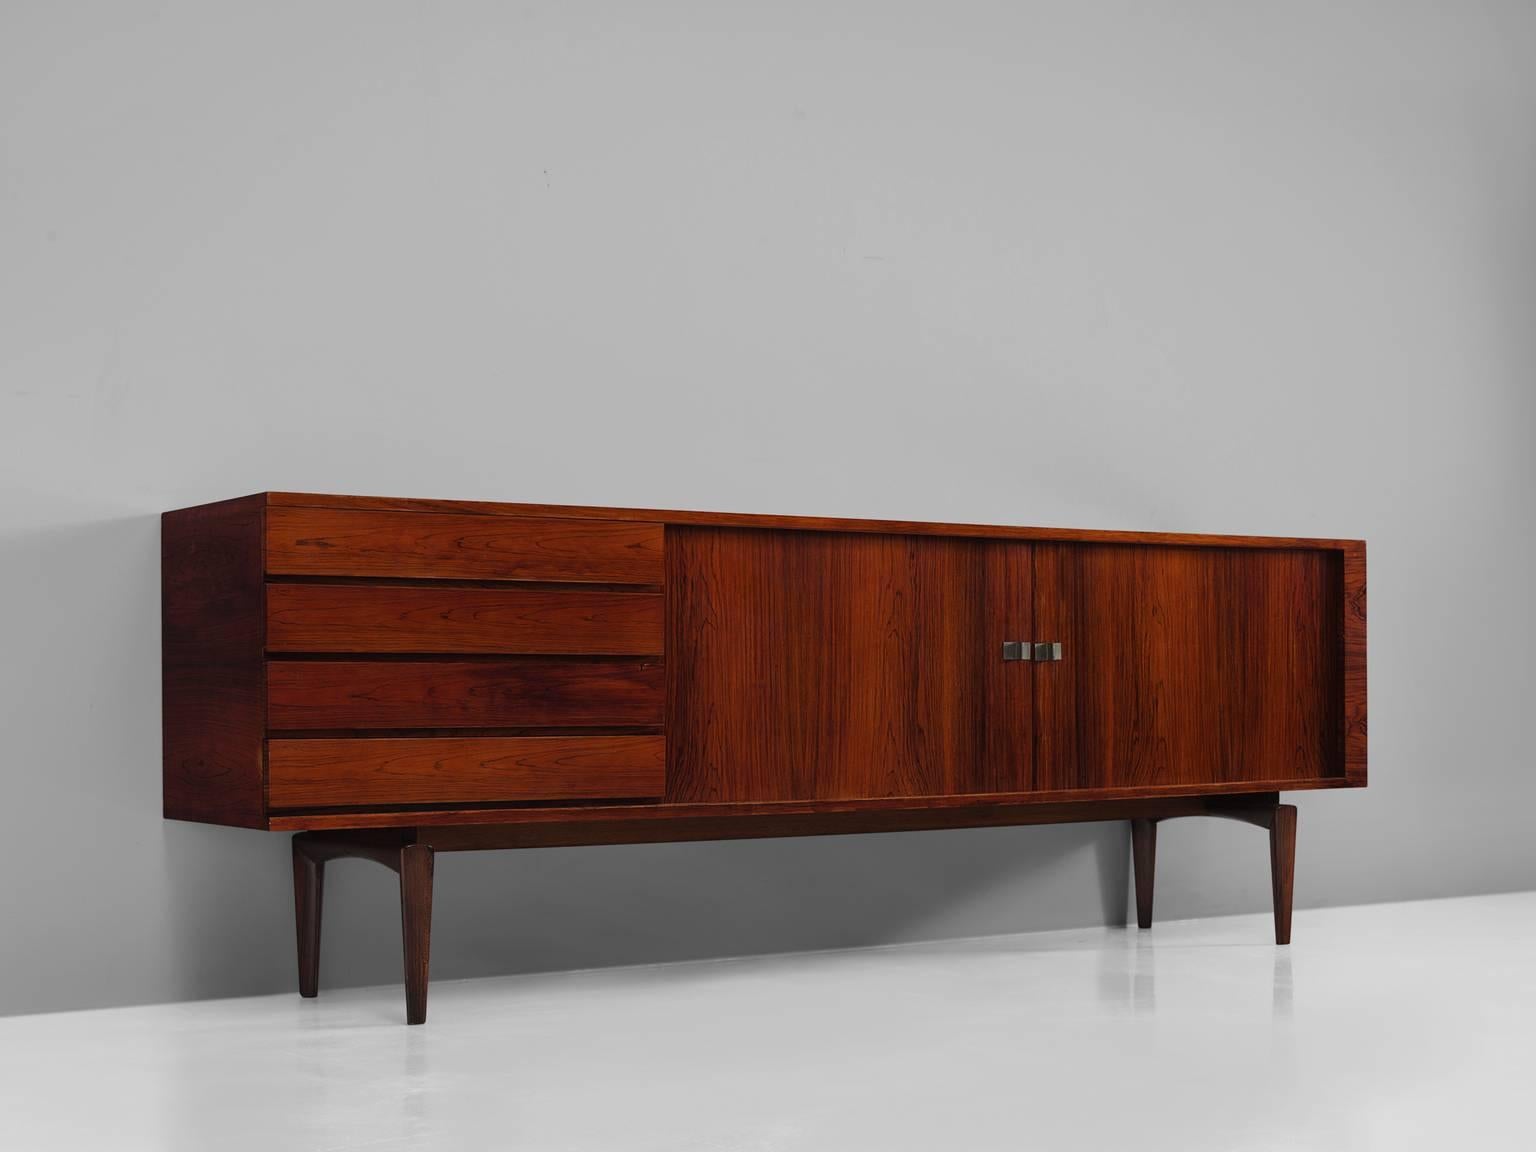 H.W. Klein, sideboard, in rosewood and metal, Italy, 1950s. 

This large Italian sideboard is designed by H.W. Klein. The credenza shows exquisite craftsmanship and balanced proportions and strong details such as the geometric unsymmetrical brass